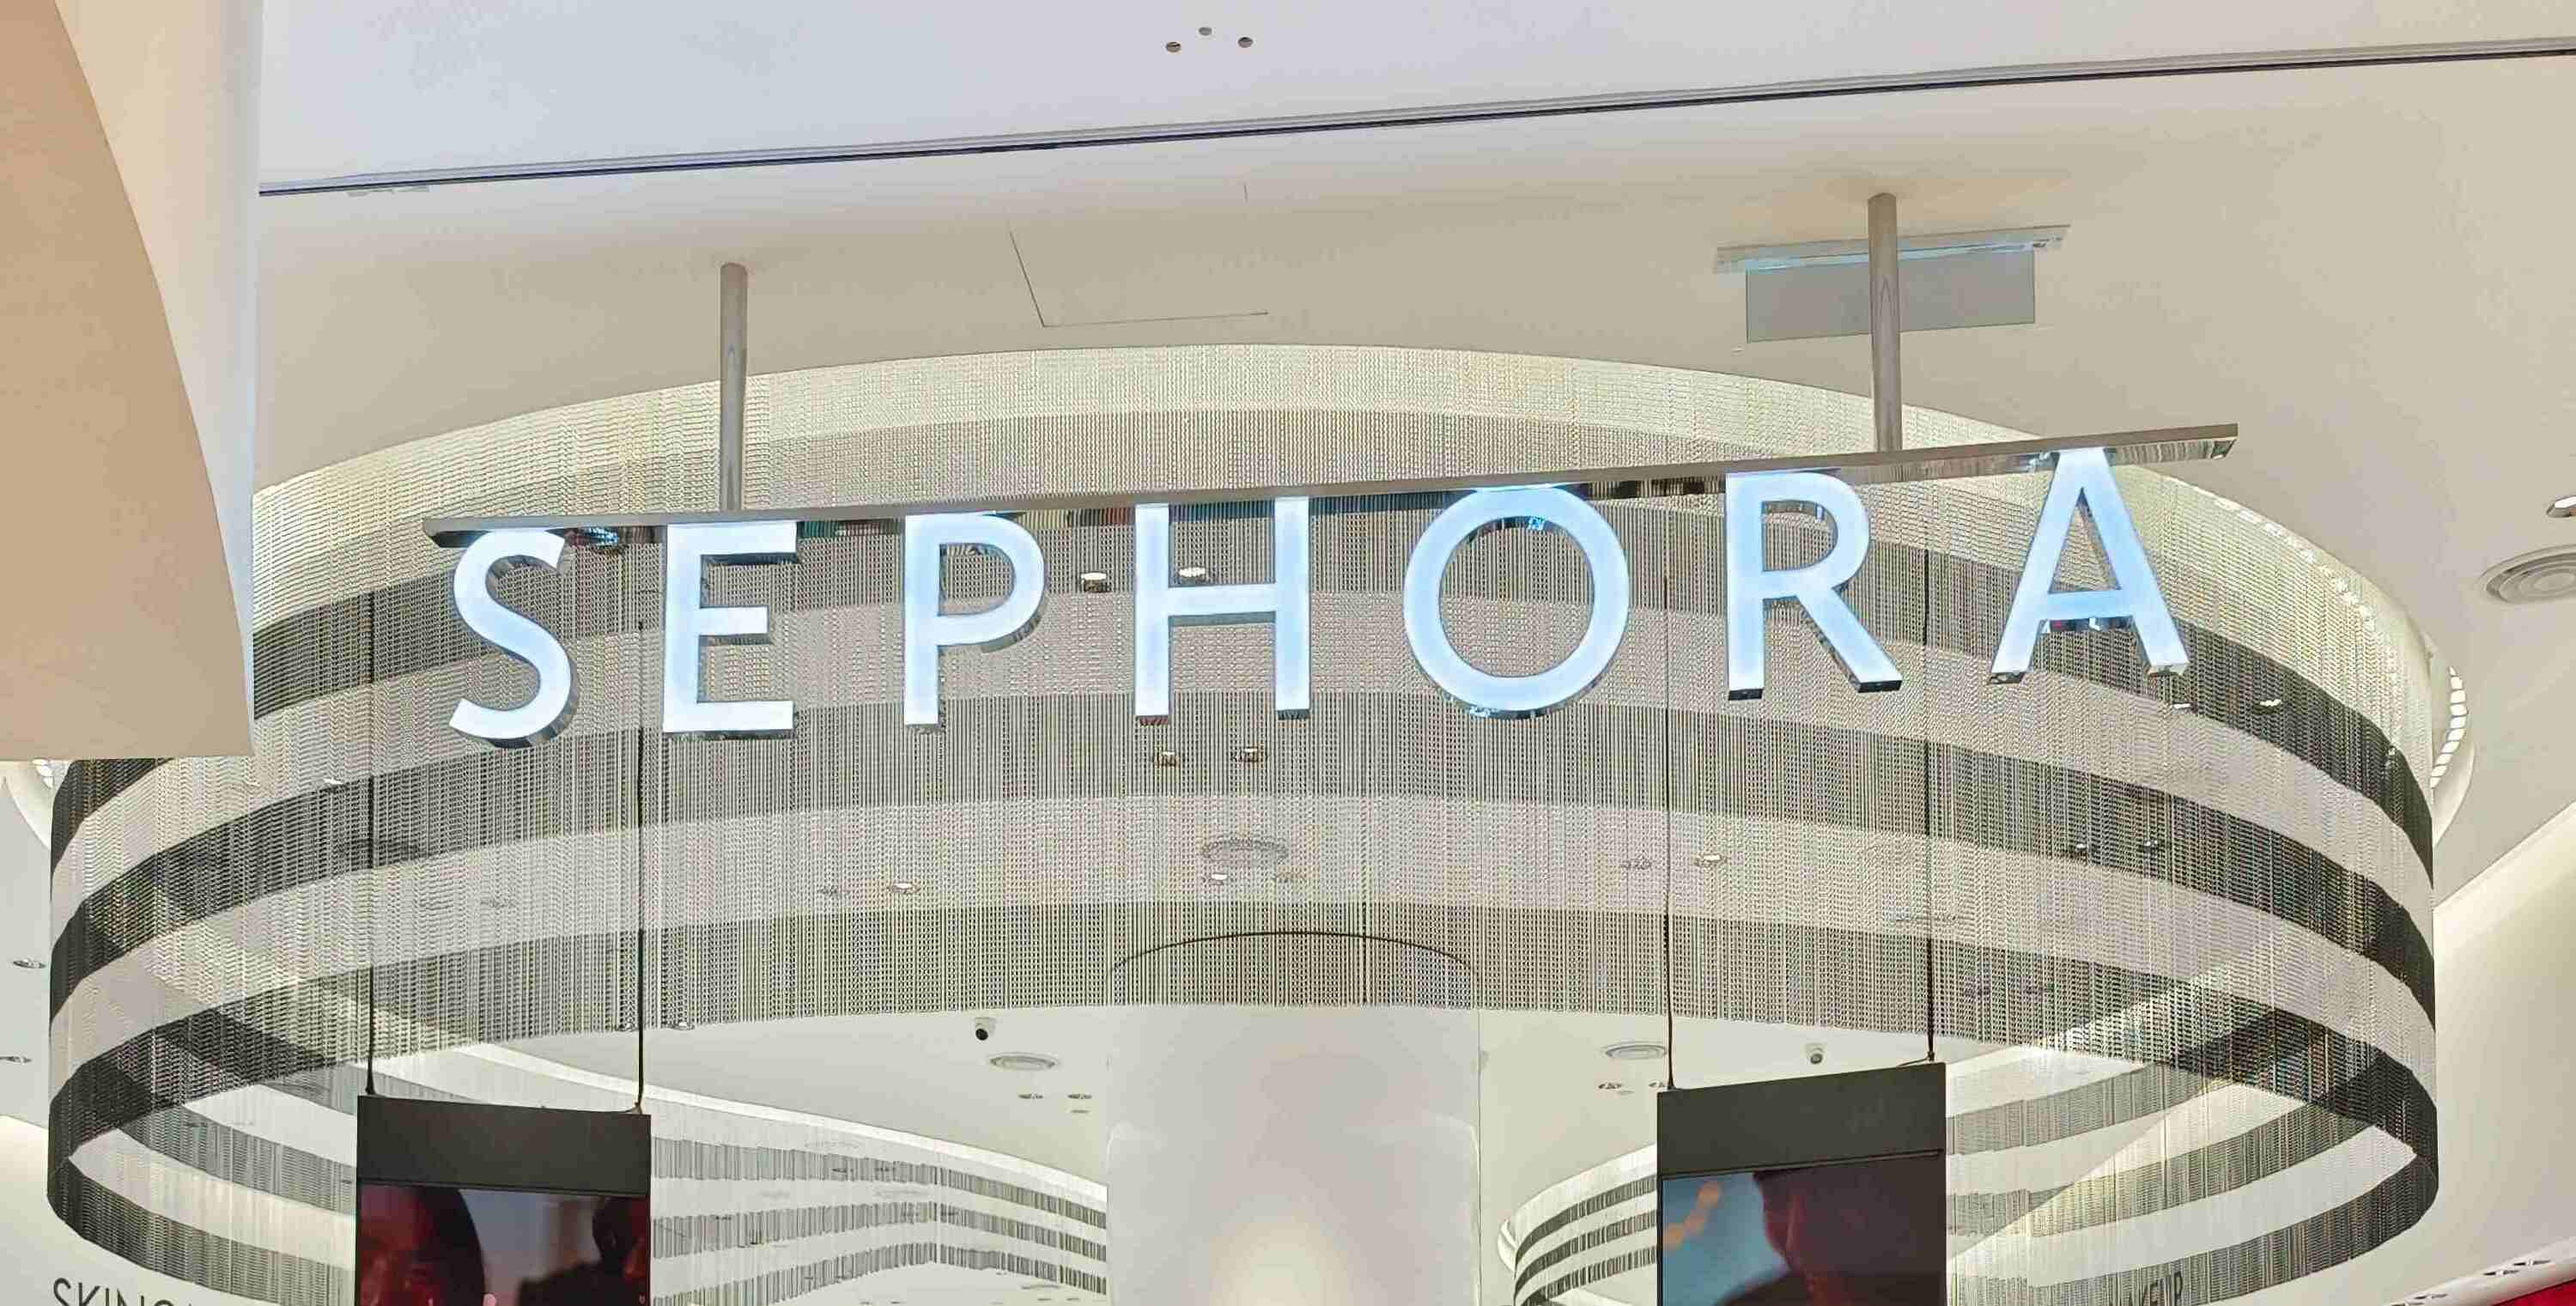 Beauty chain Sephora is opening two new UK stores outside London